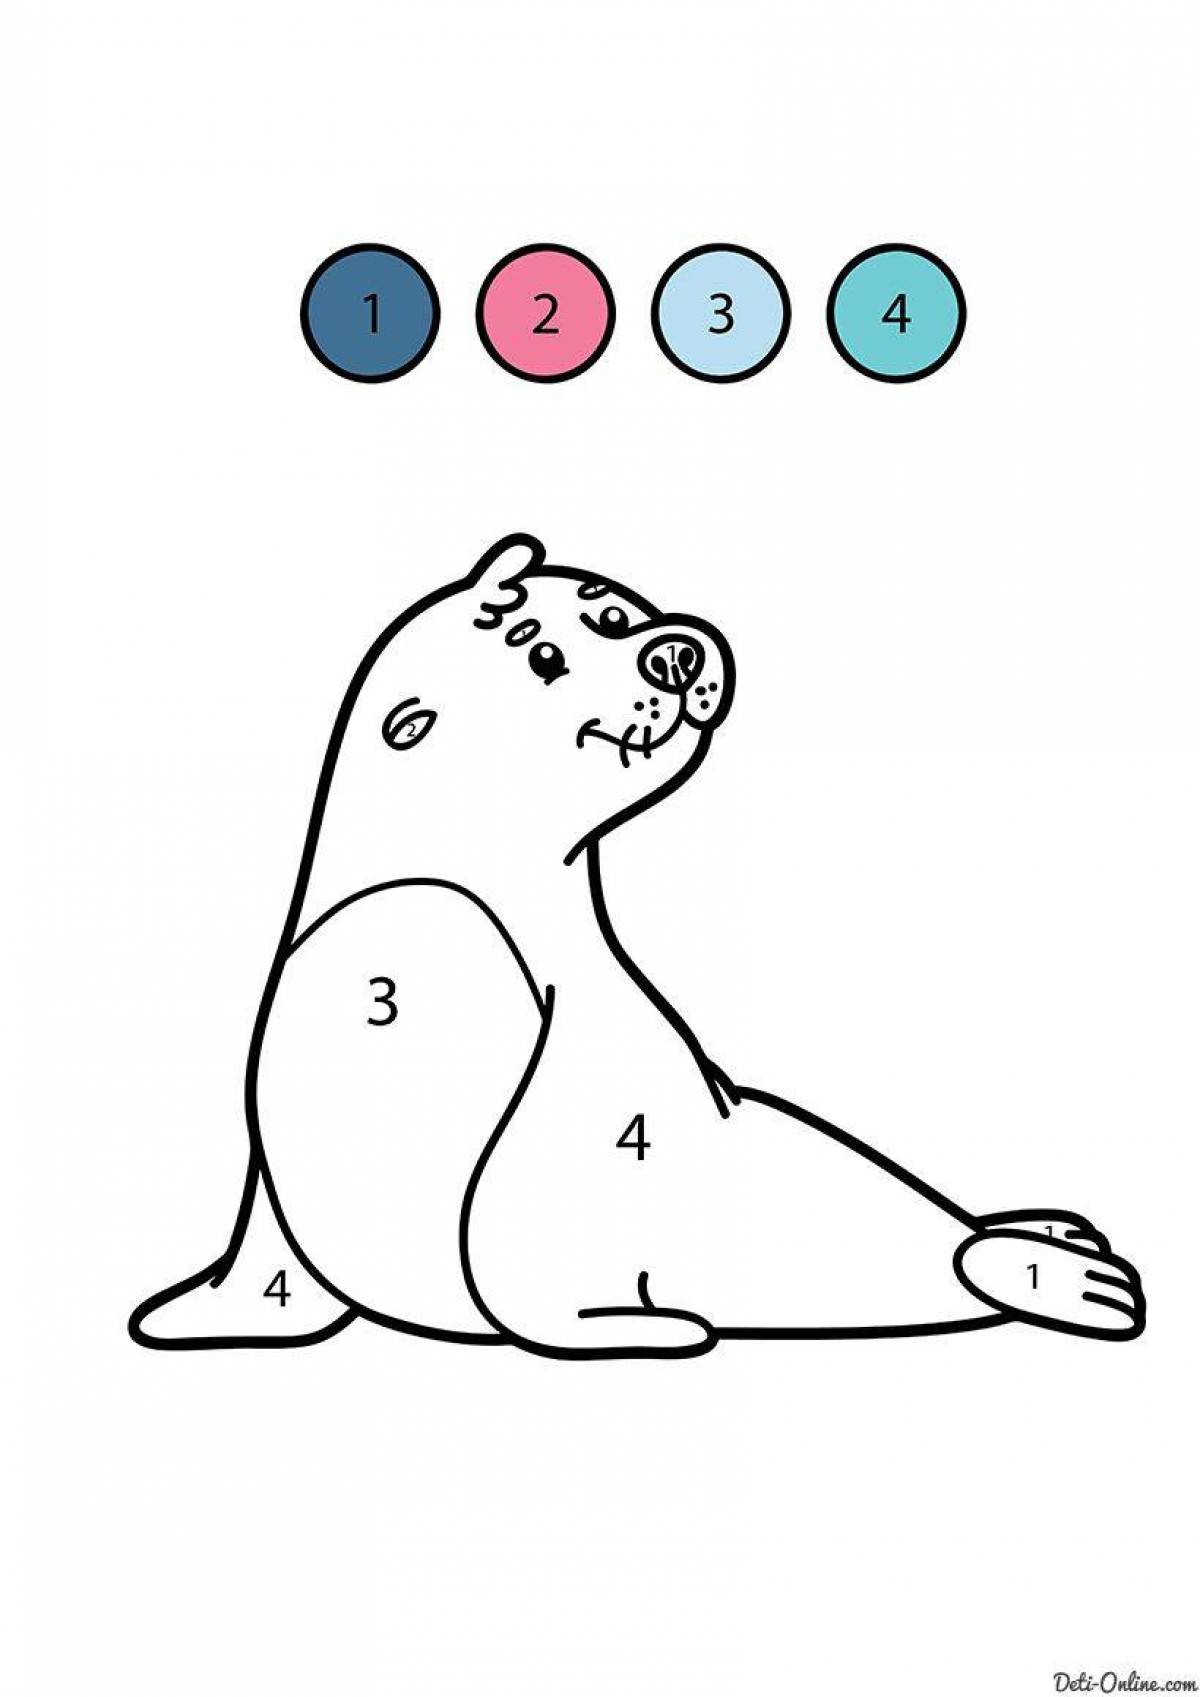 Coloring book happy seal for kids